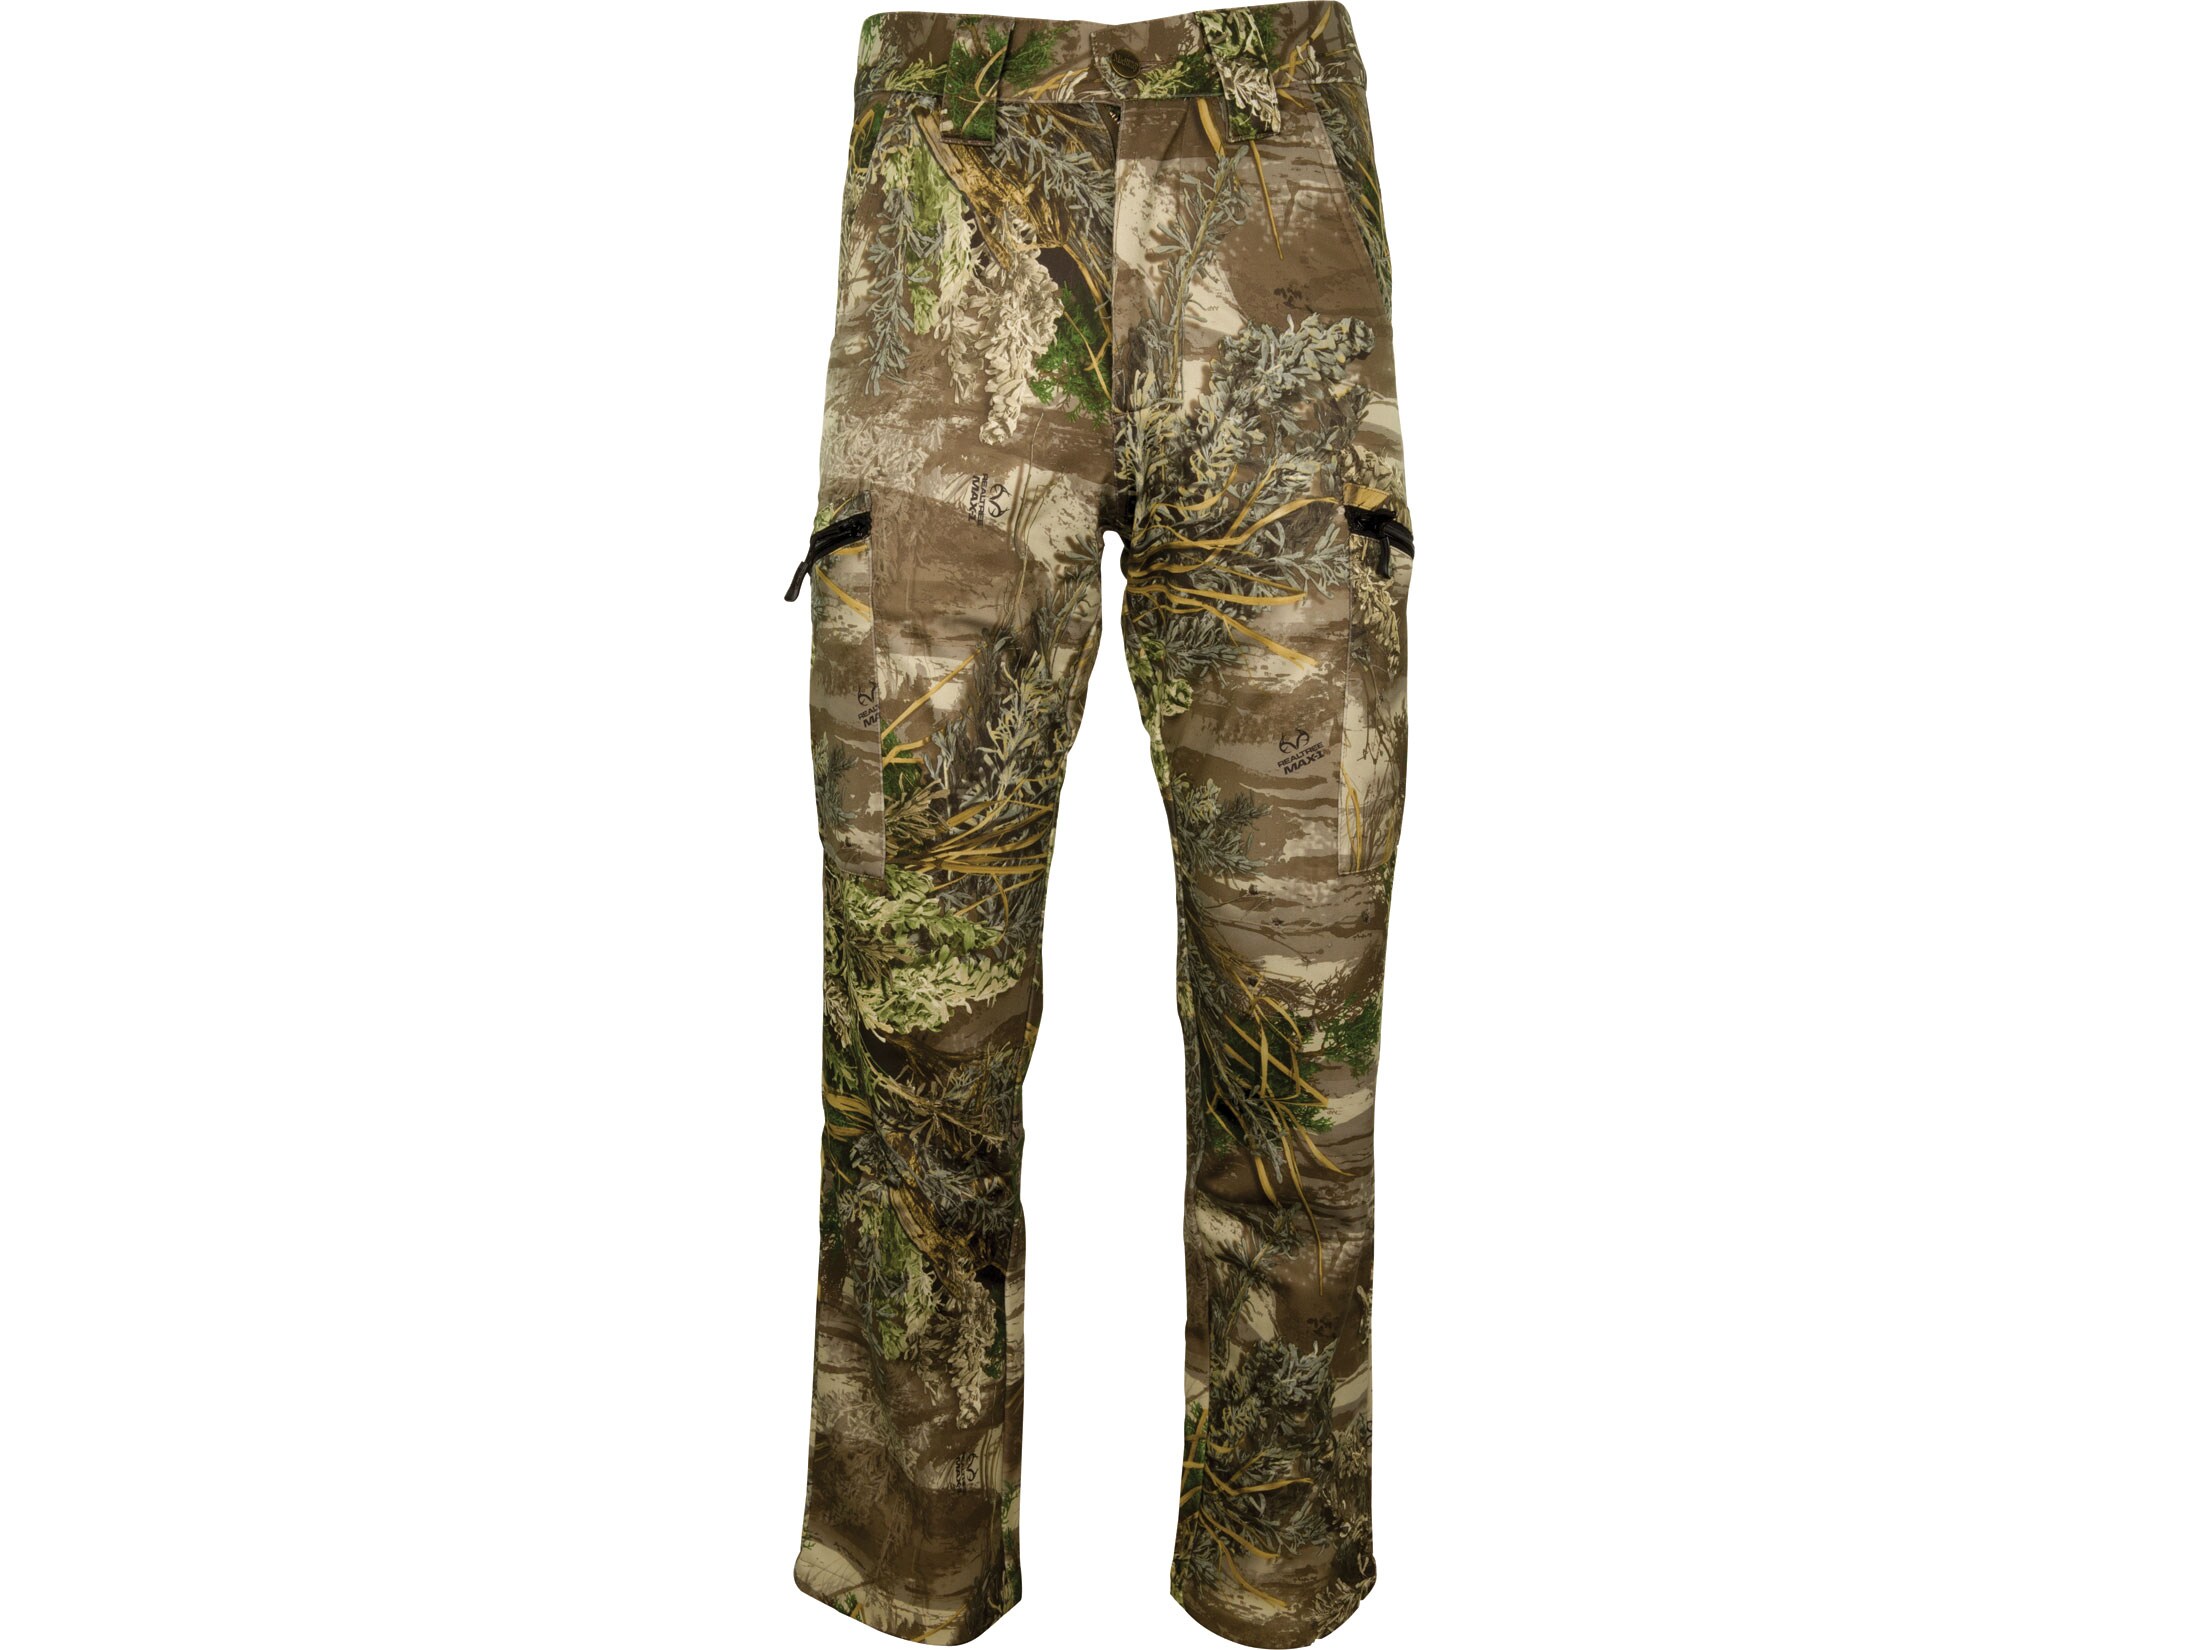 MidwayUSA Men's Stealth Softshell Pants Realtree Max-1 Camo XL-Tall